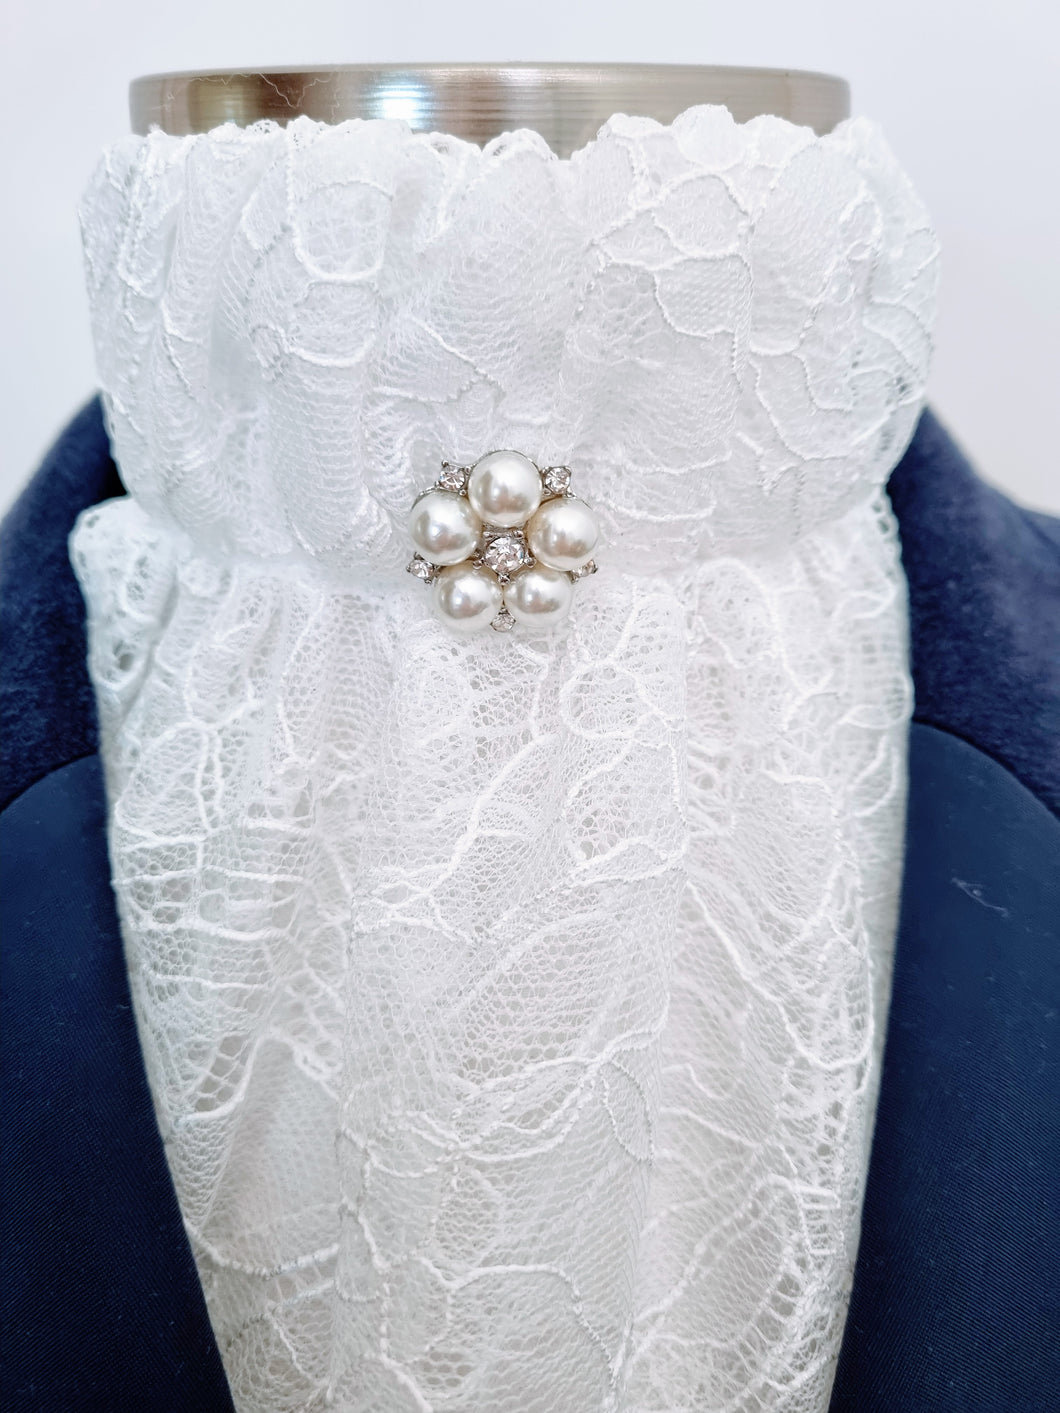 ERA EURO GRACE STOCK TIE - White Chantilly lace with pearl brooch